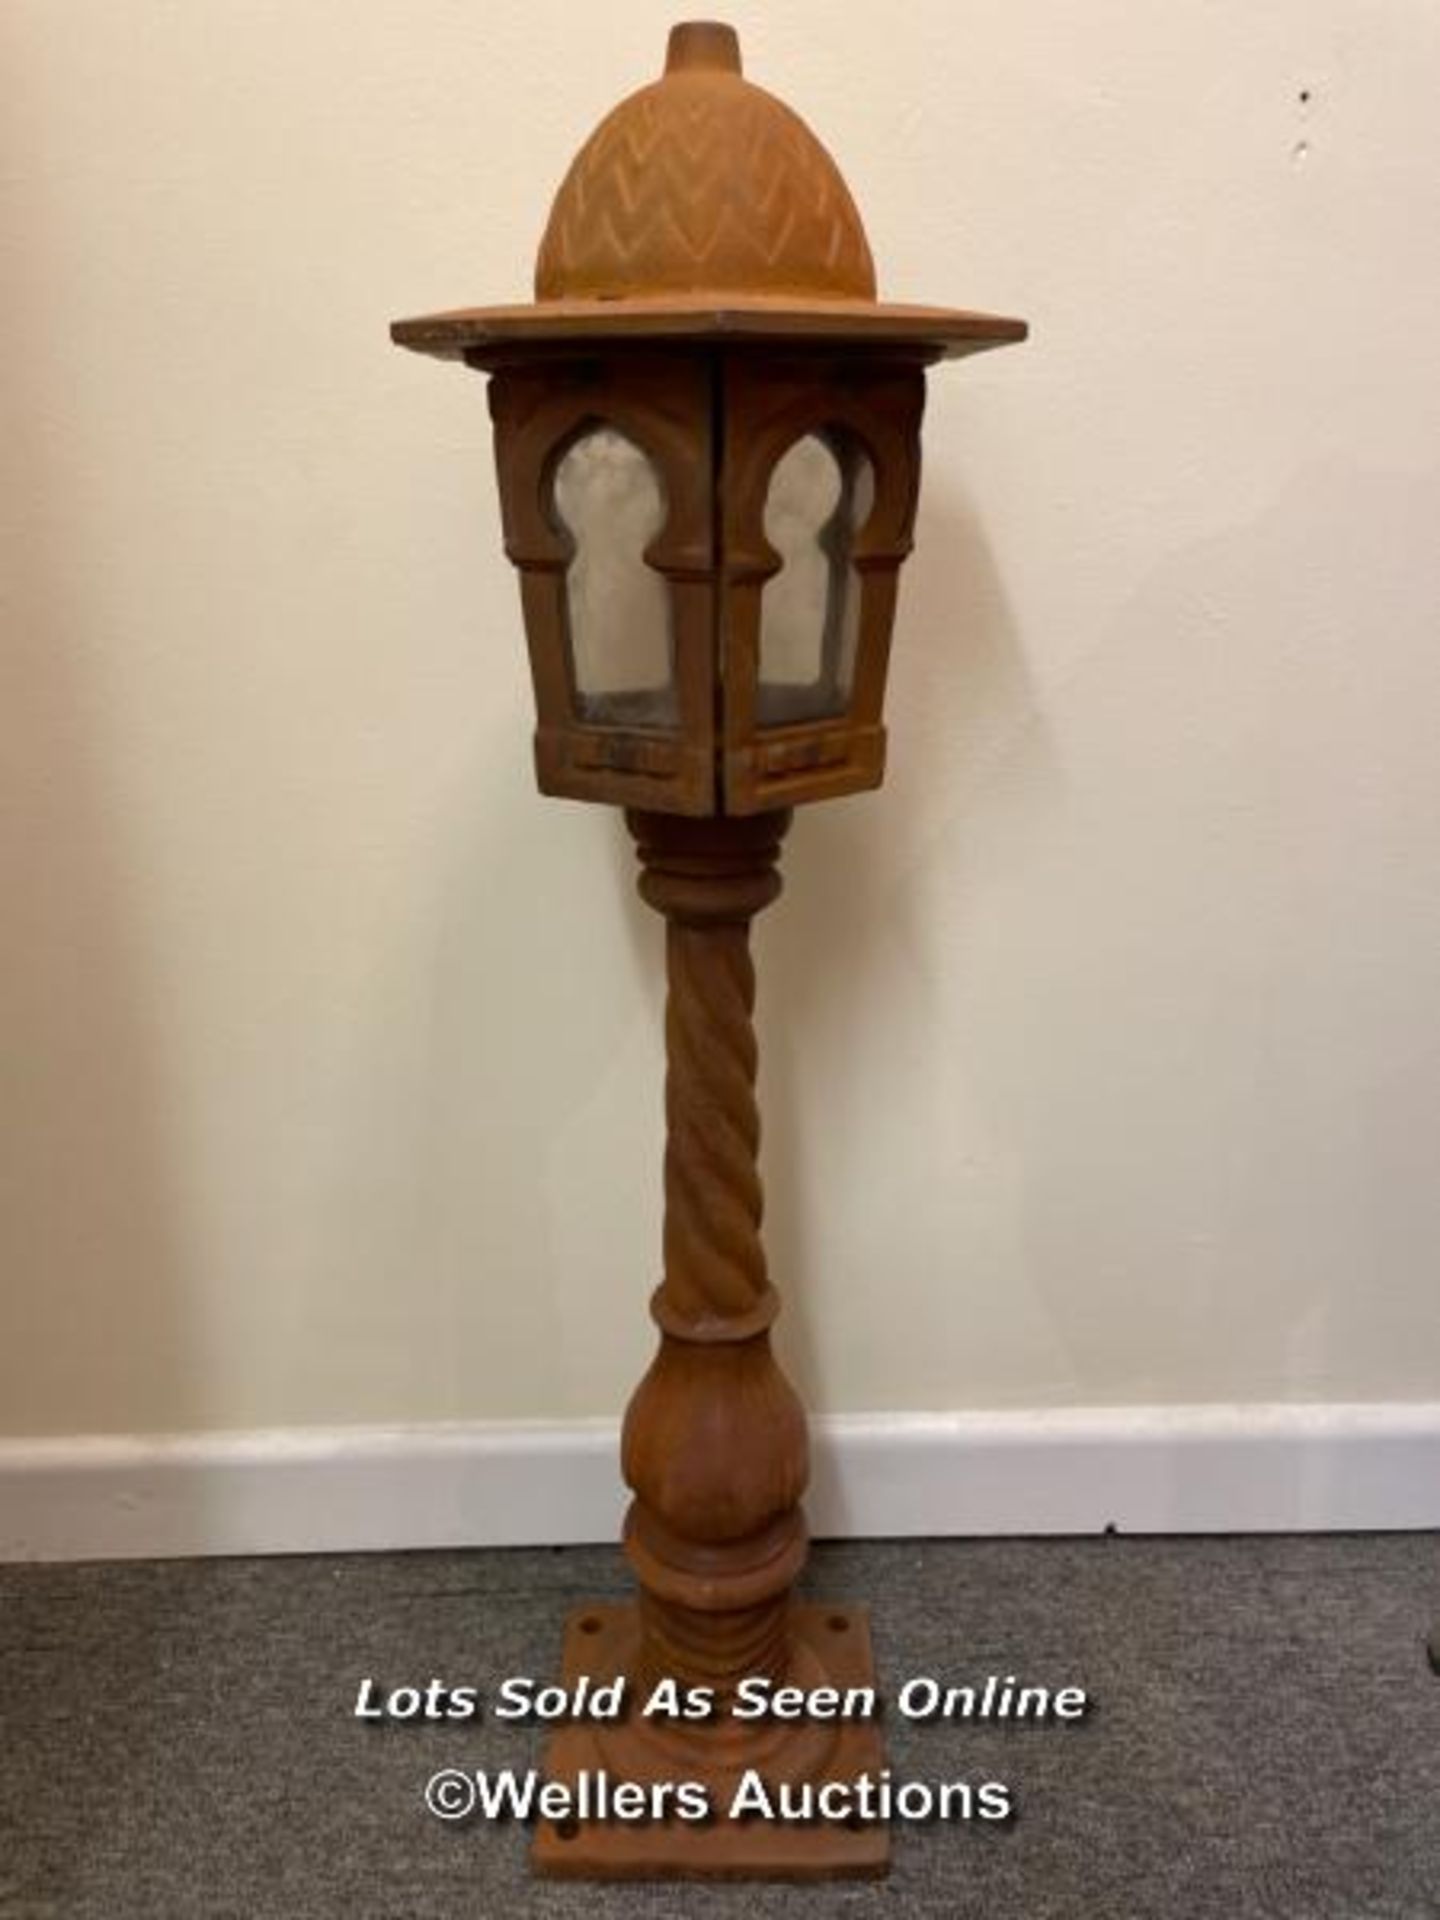 *PAIR CAST IRON LAMP POSTS - ONLY ONE SHOWN IN IMAGE - 100CM H / ITEM LOCATION: GUILDFORD, GU14SJ (